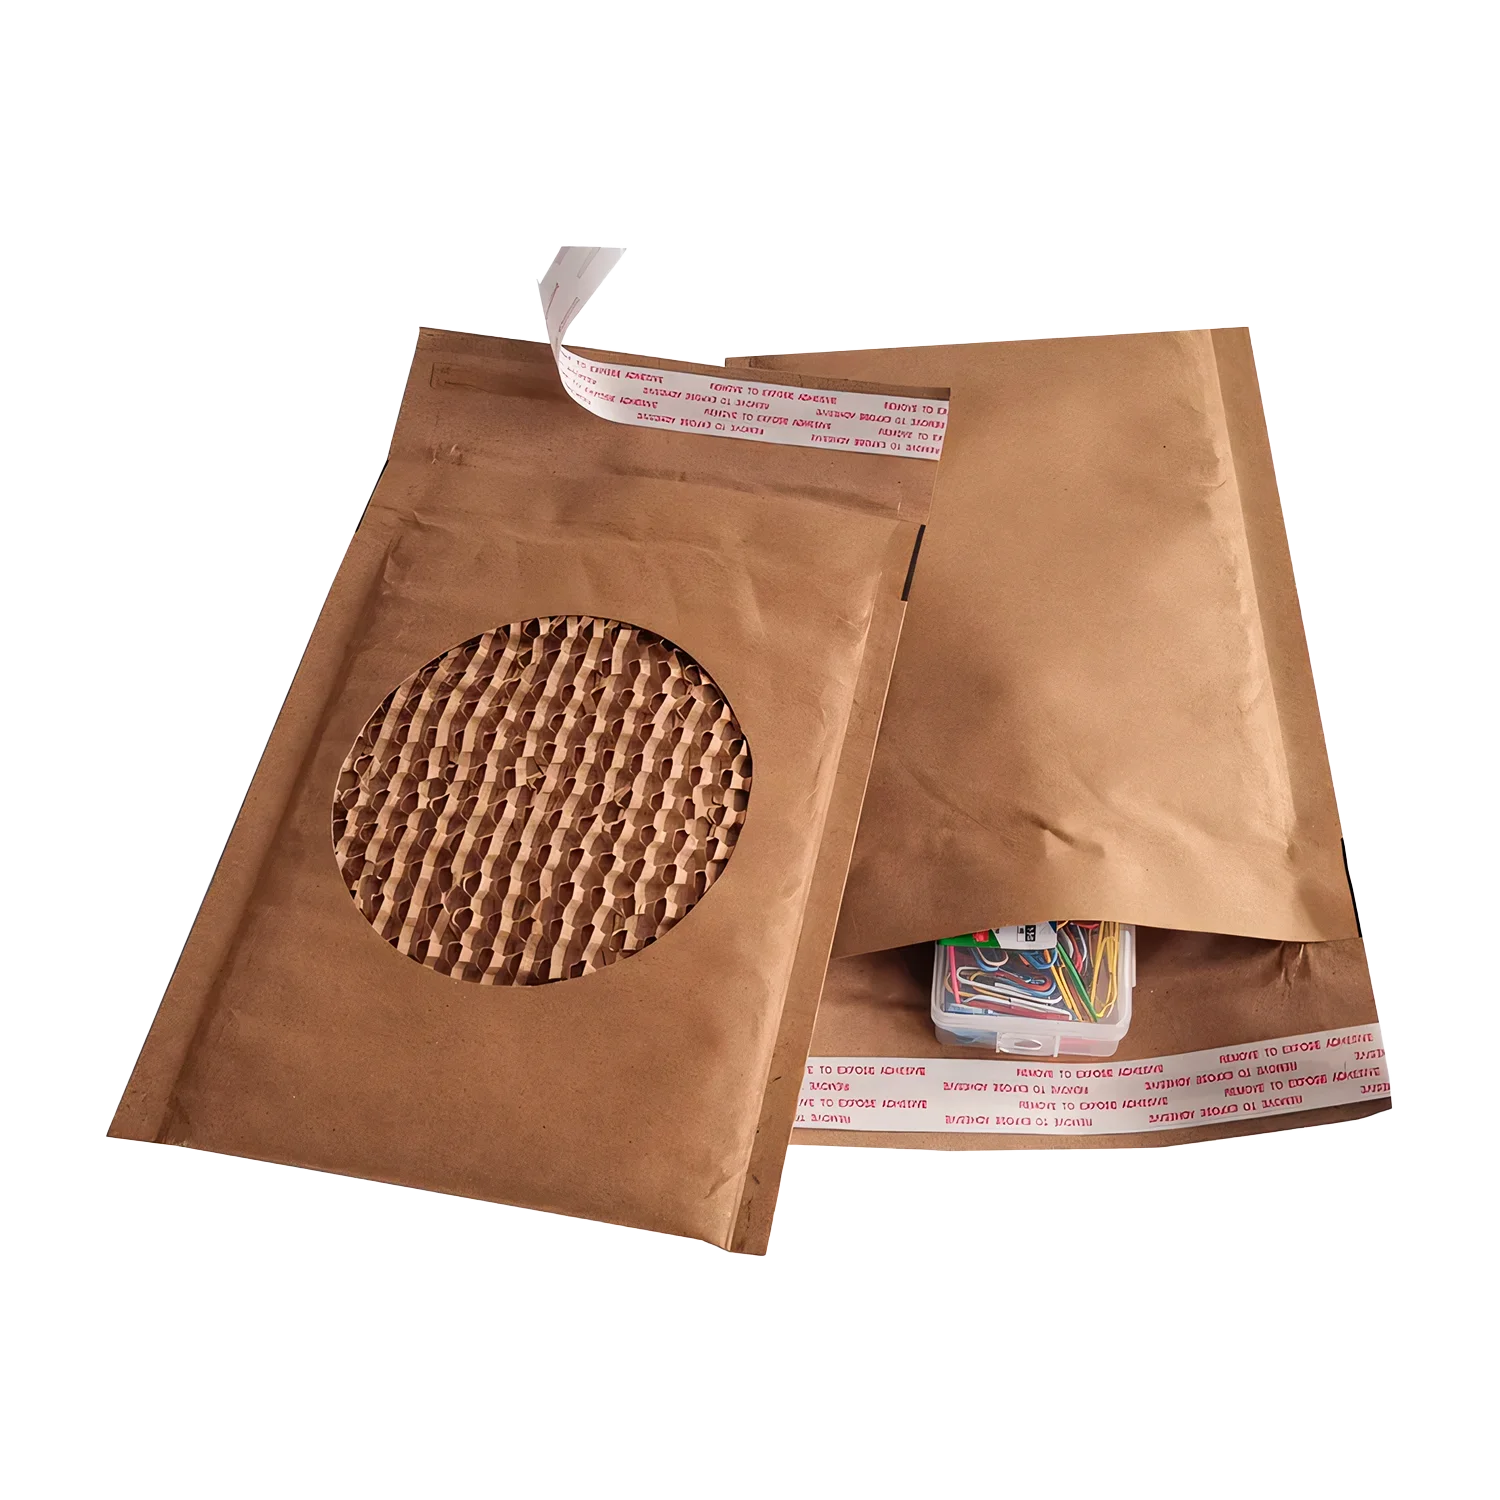 Honeycomb kraft paper padded envelopes perfect for sending small items cheaply